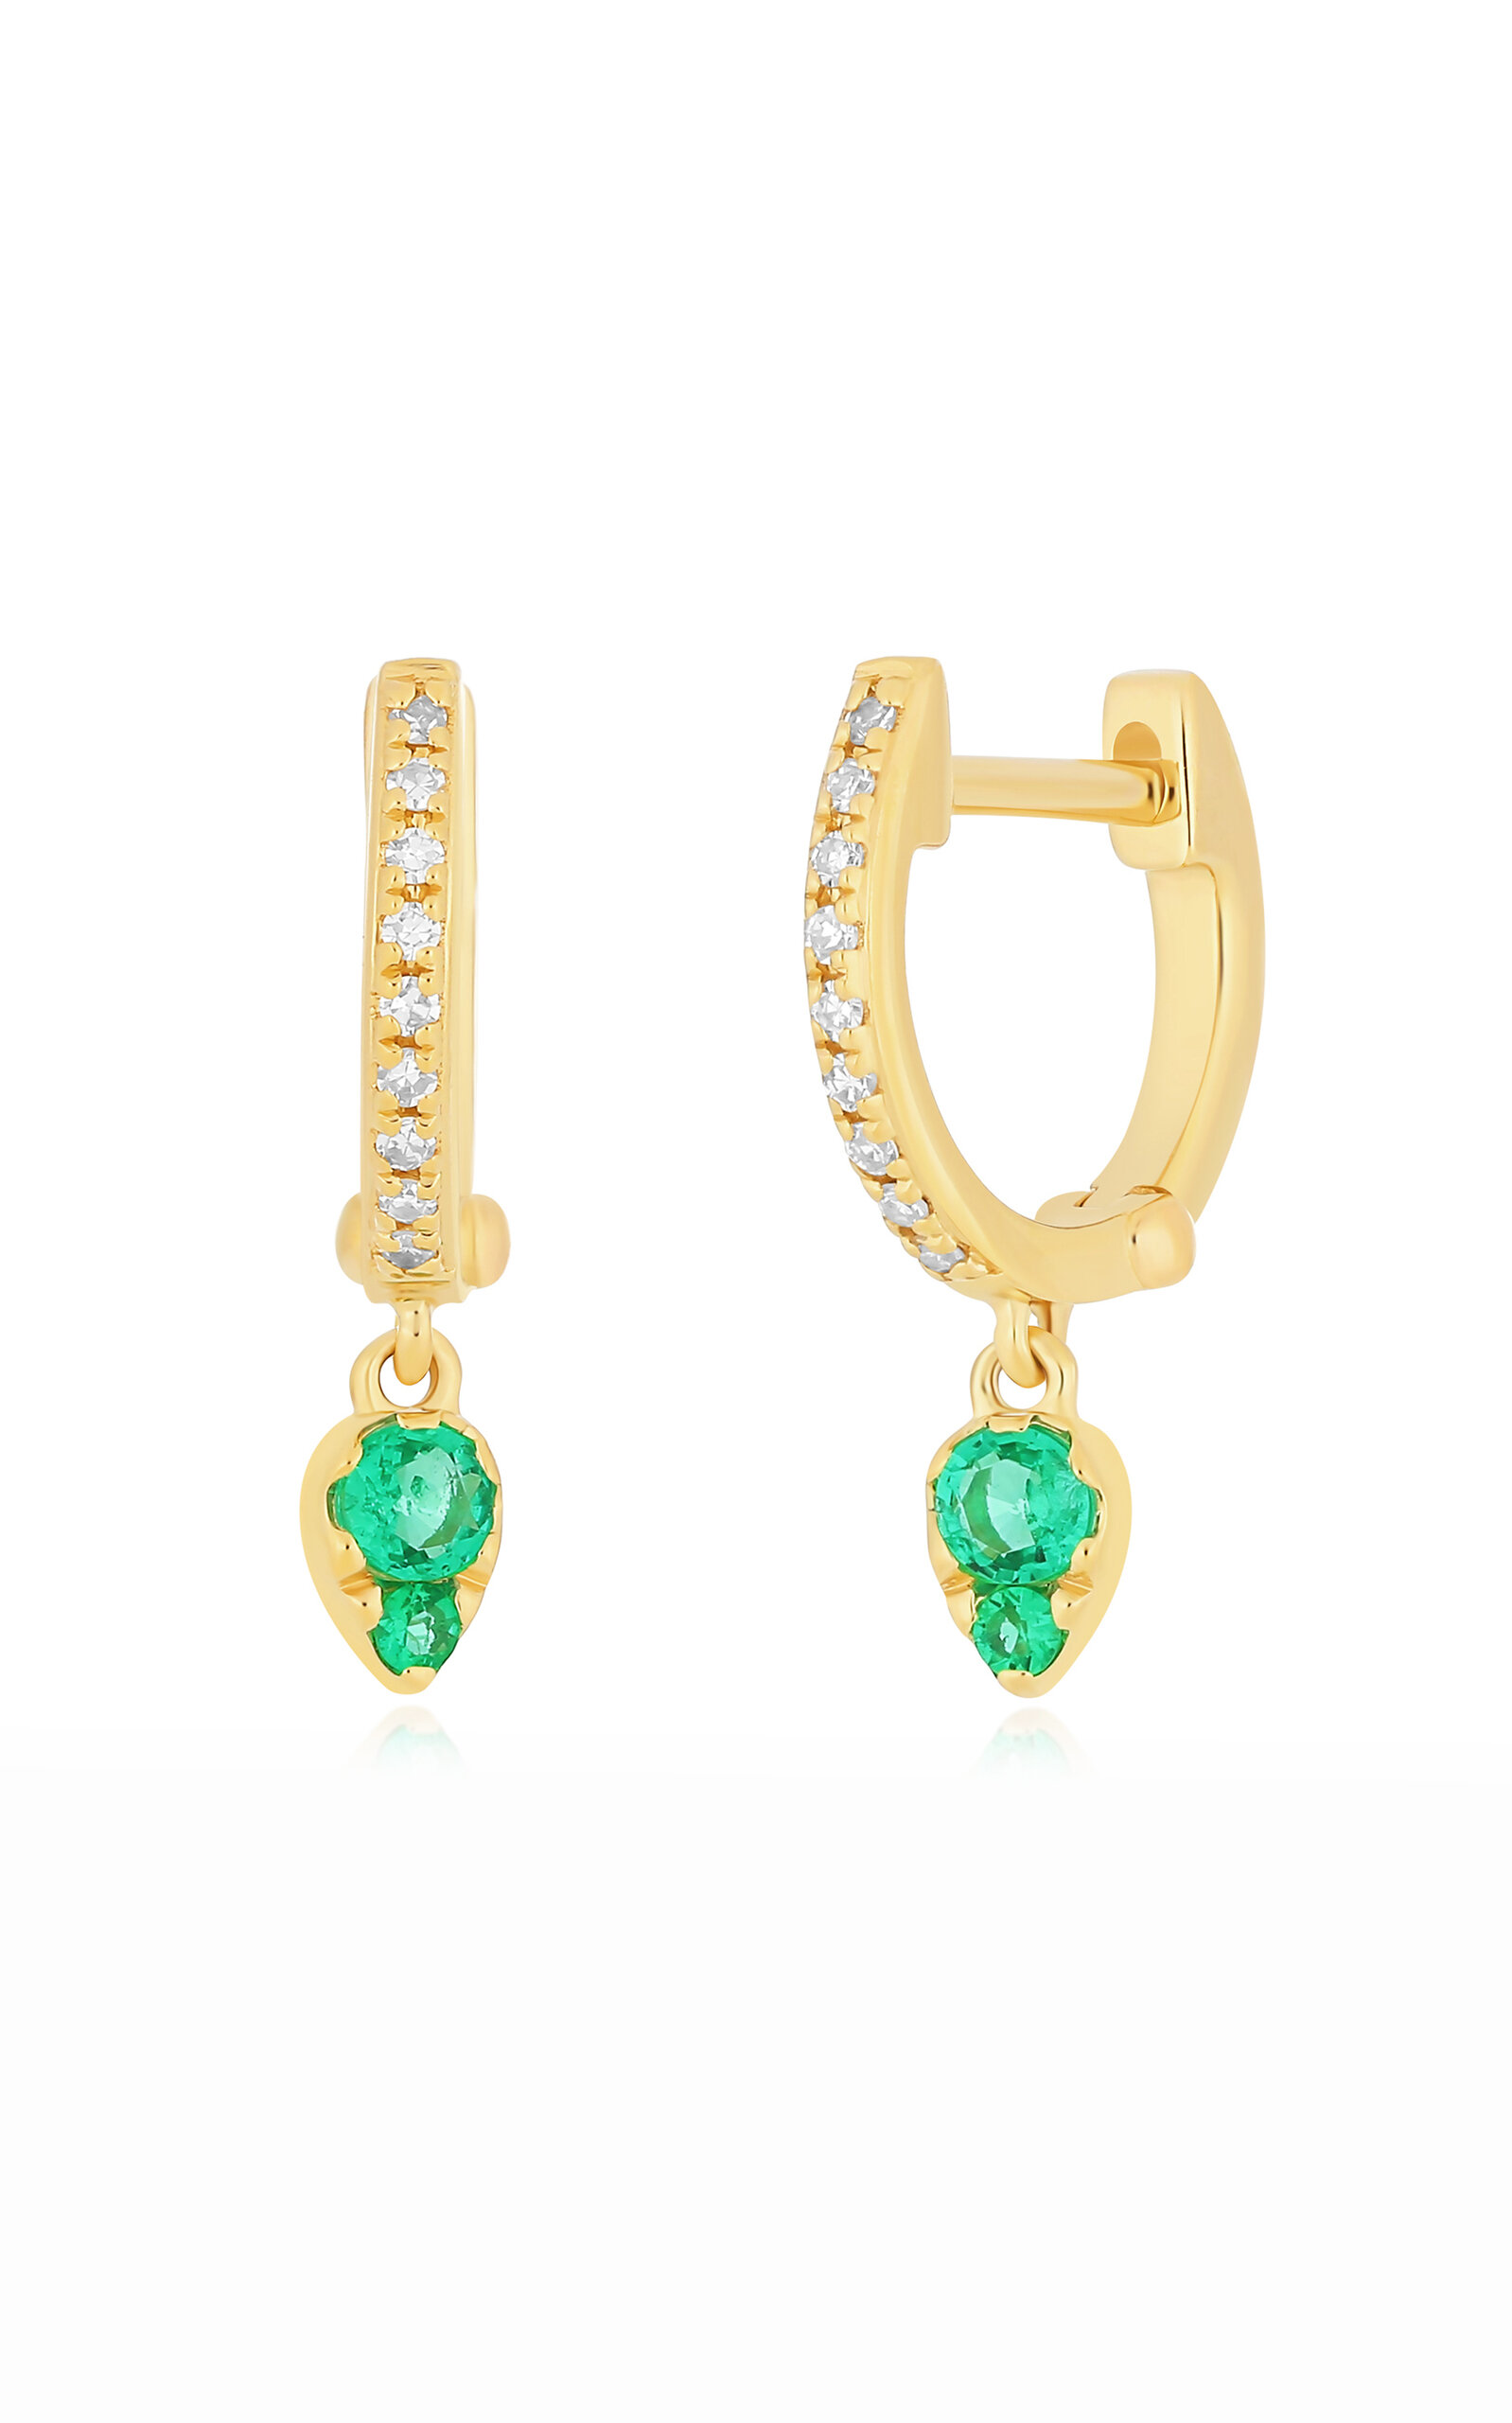 Ef Collection 14k Gold Emerald Earrings